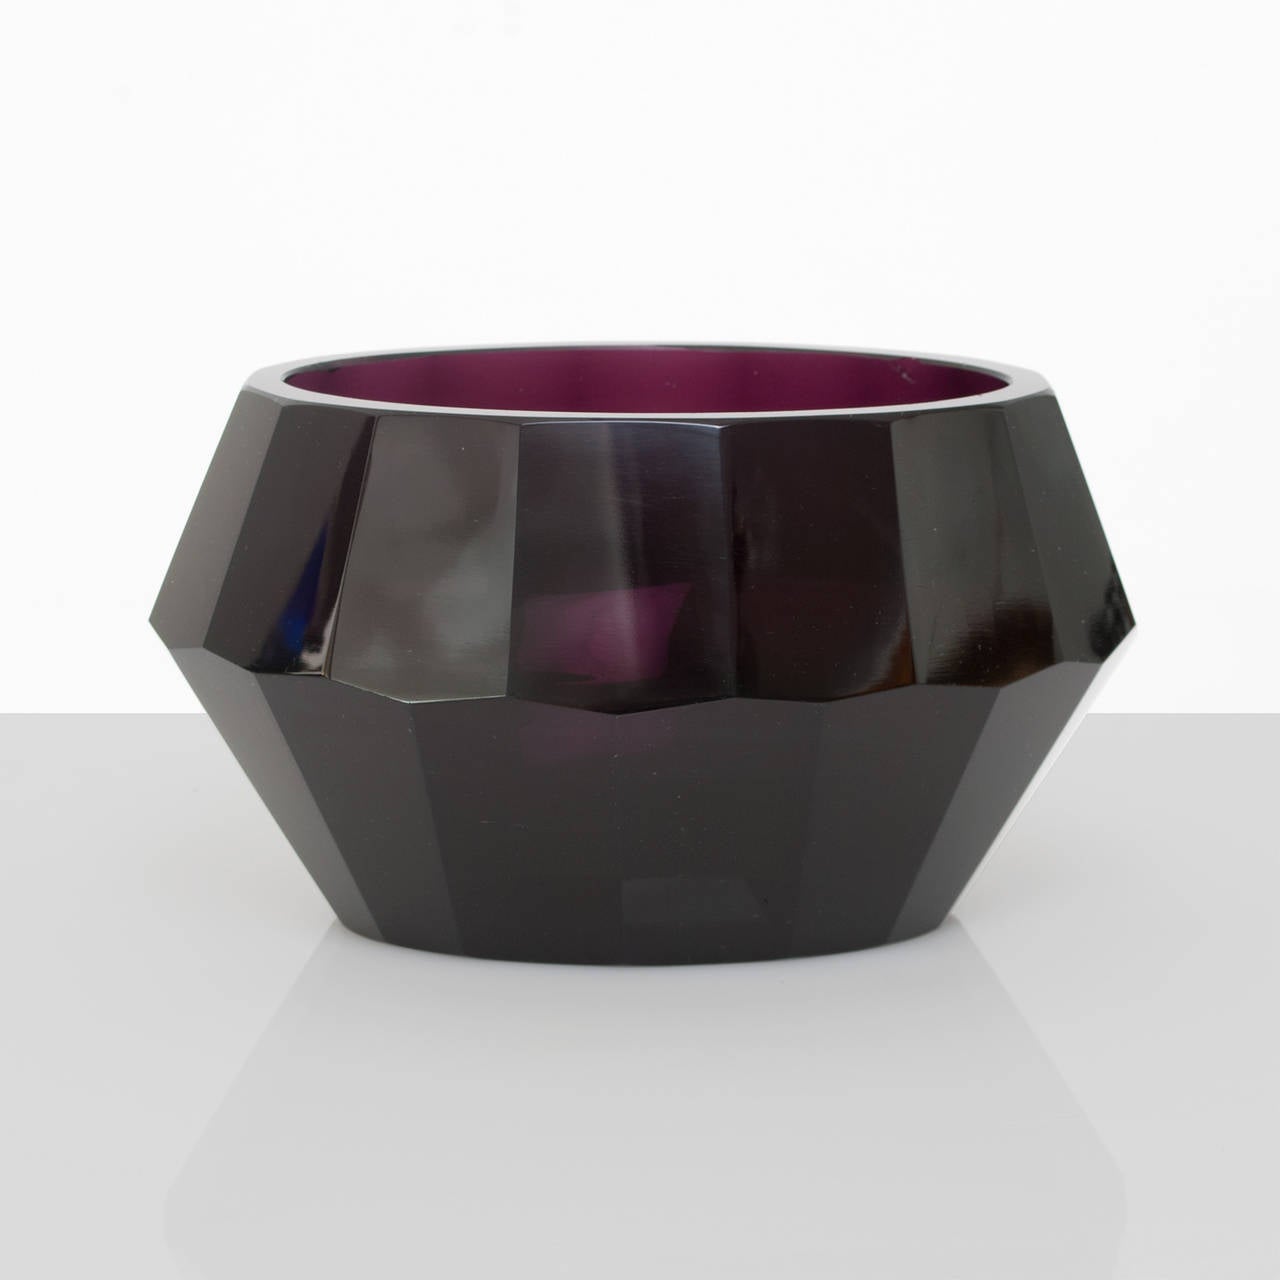 Faceted amethyst colored glass bowl in oval shape with highly polished surface. Attributed to Moser & Sohne, Austria. Bowl in in very good condition bottom surface with wear. Length 8.5